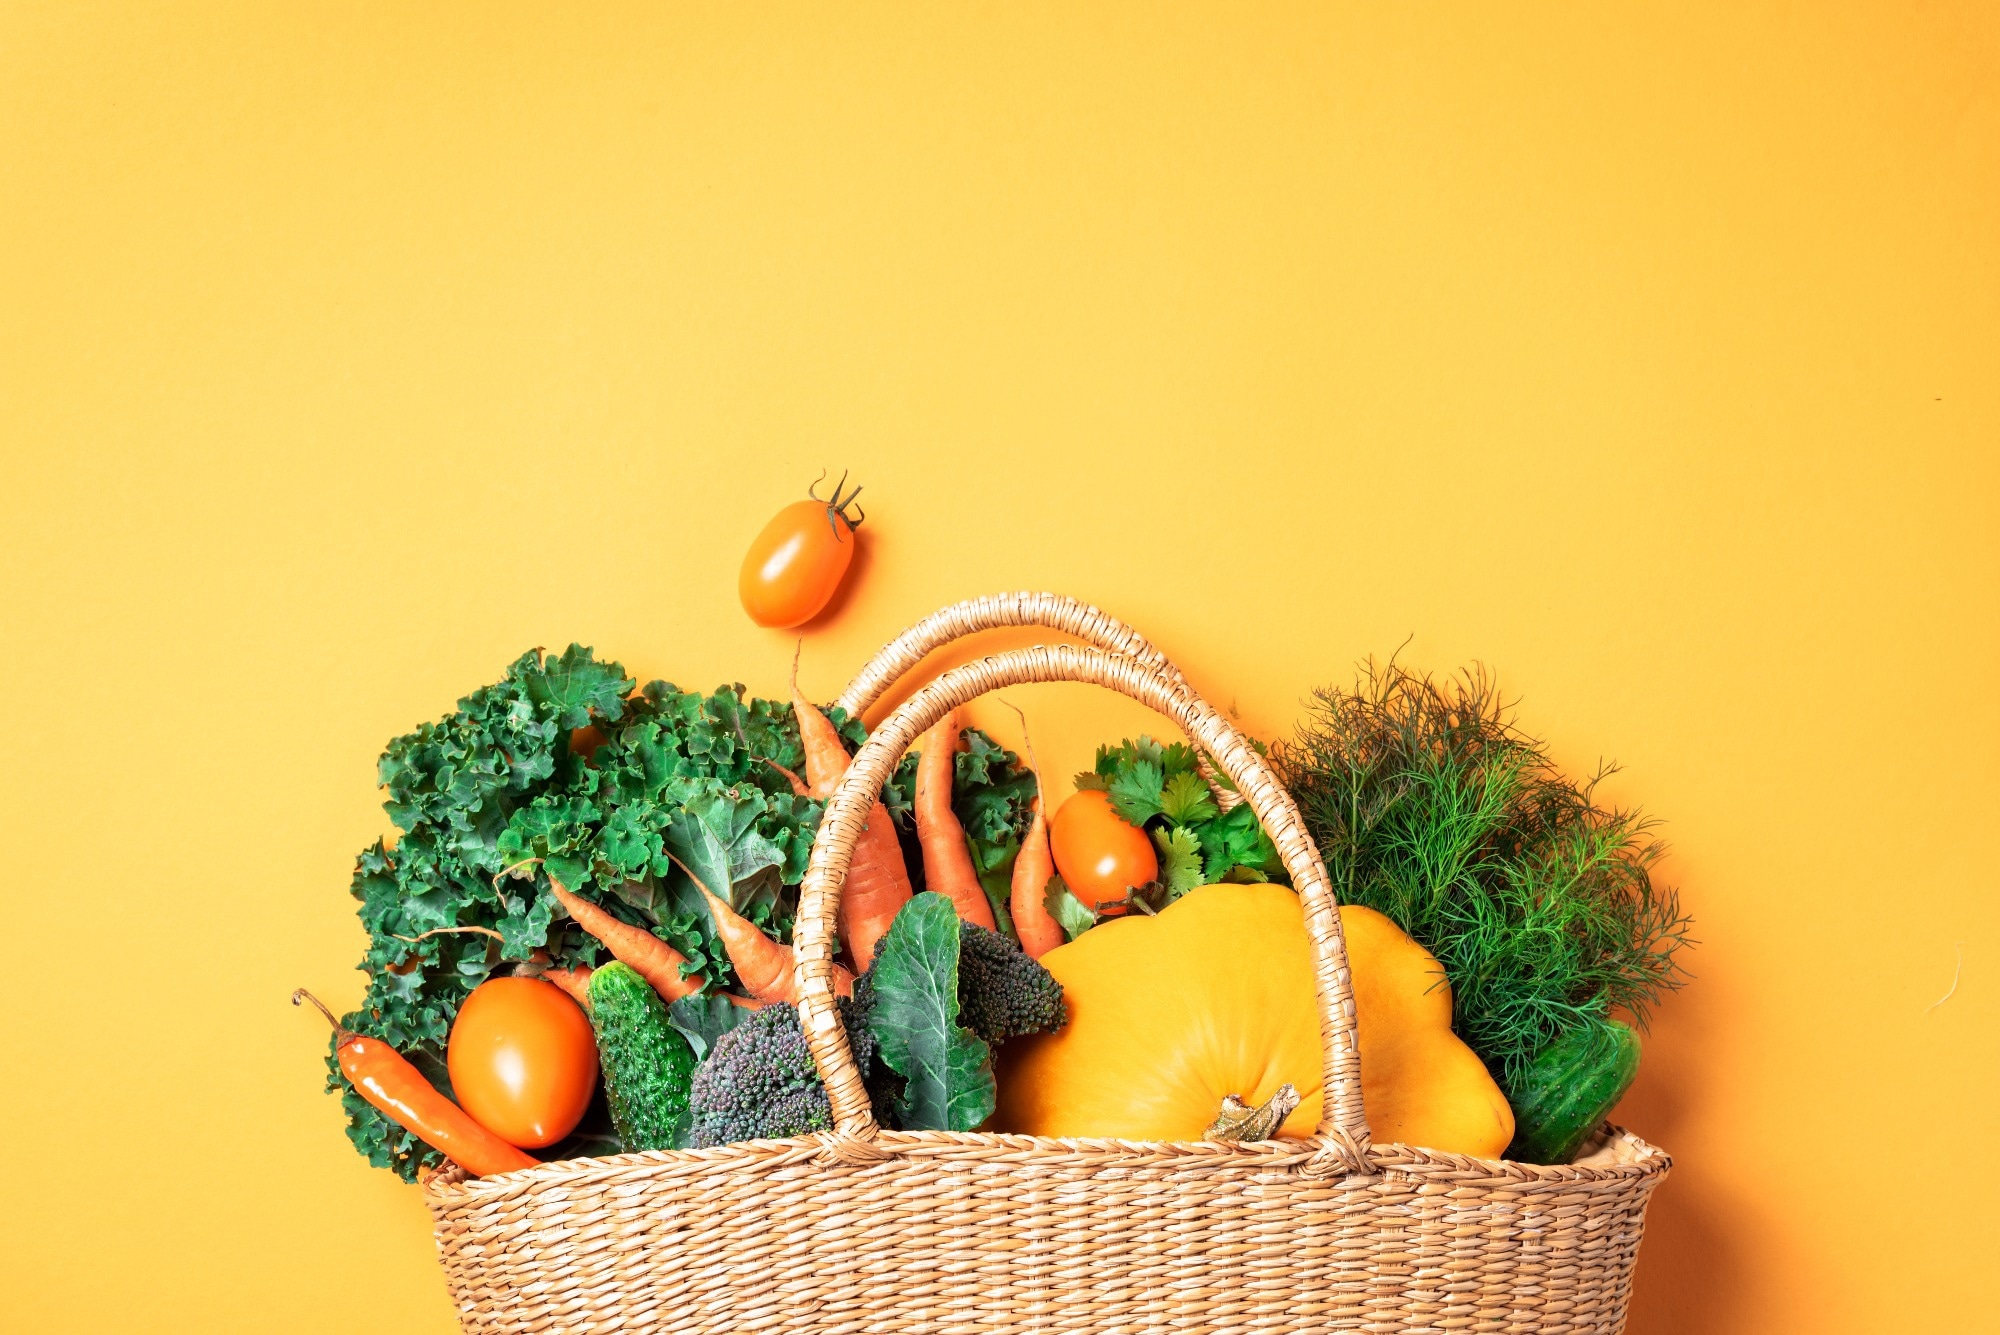 Study: Development of the VEGANScreener, a Tool for a Quick Diet Quality Assessment among Vegans in Europe. Image Credit: j.chizhe / Shutterstock